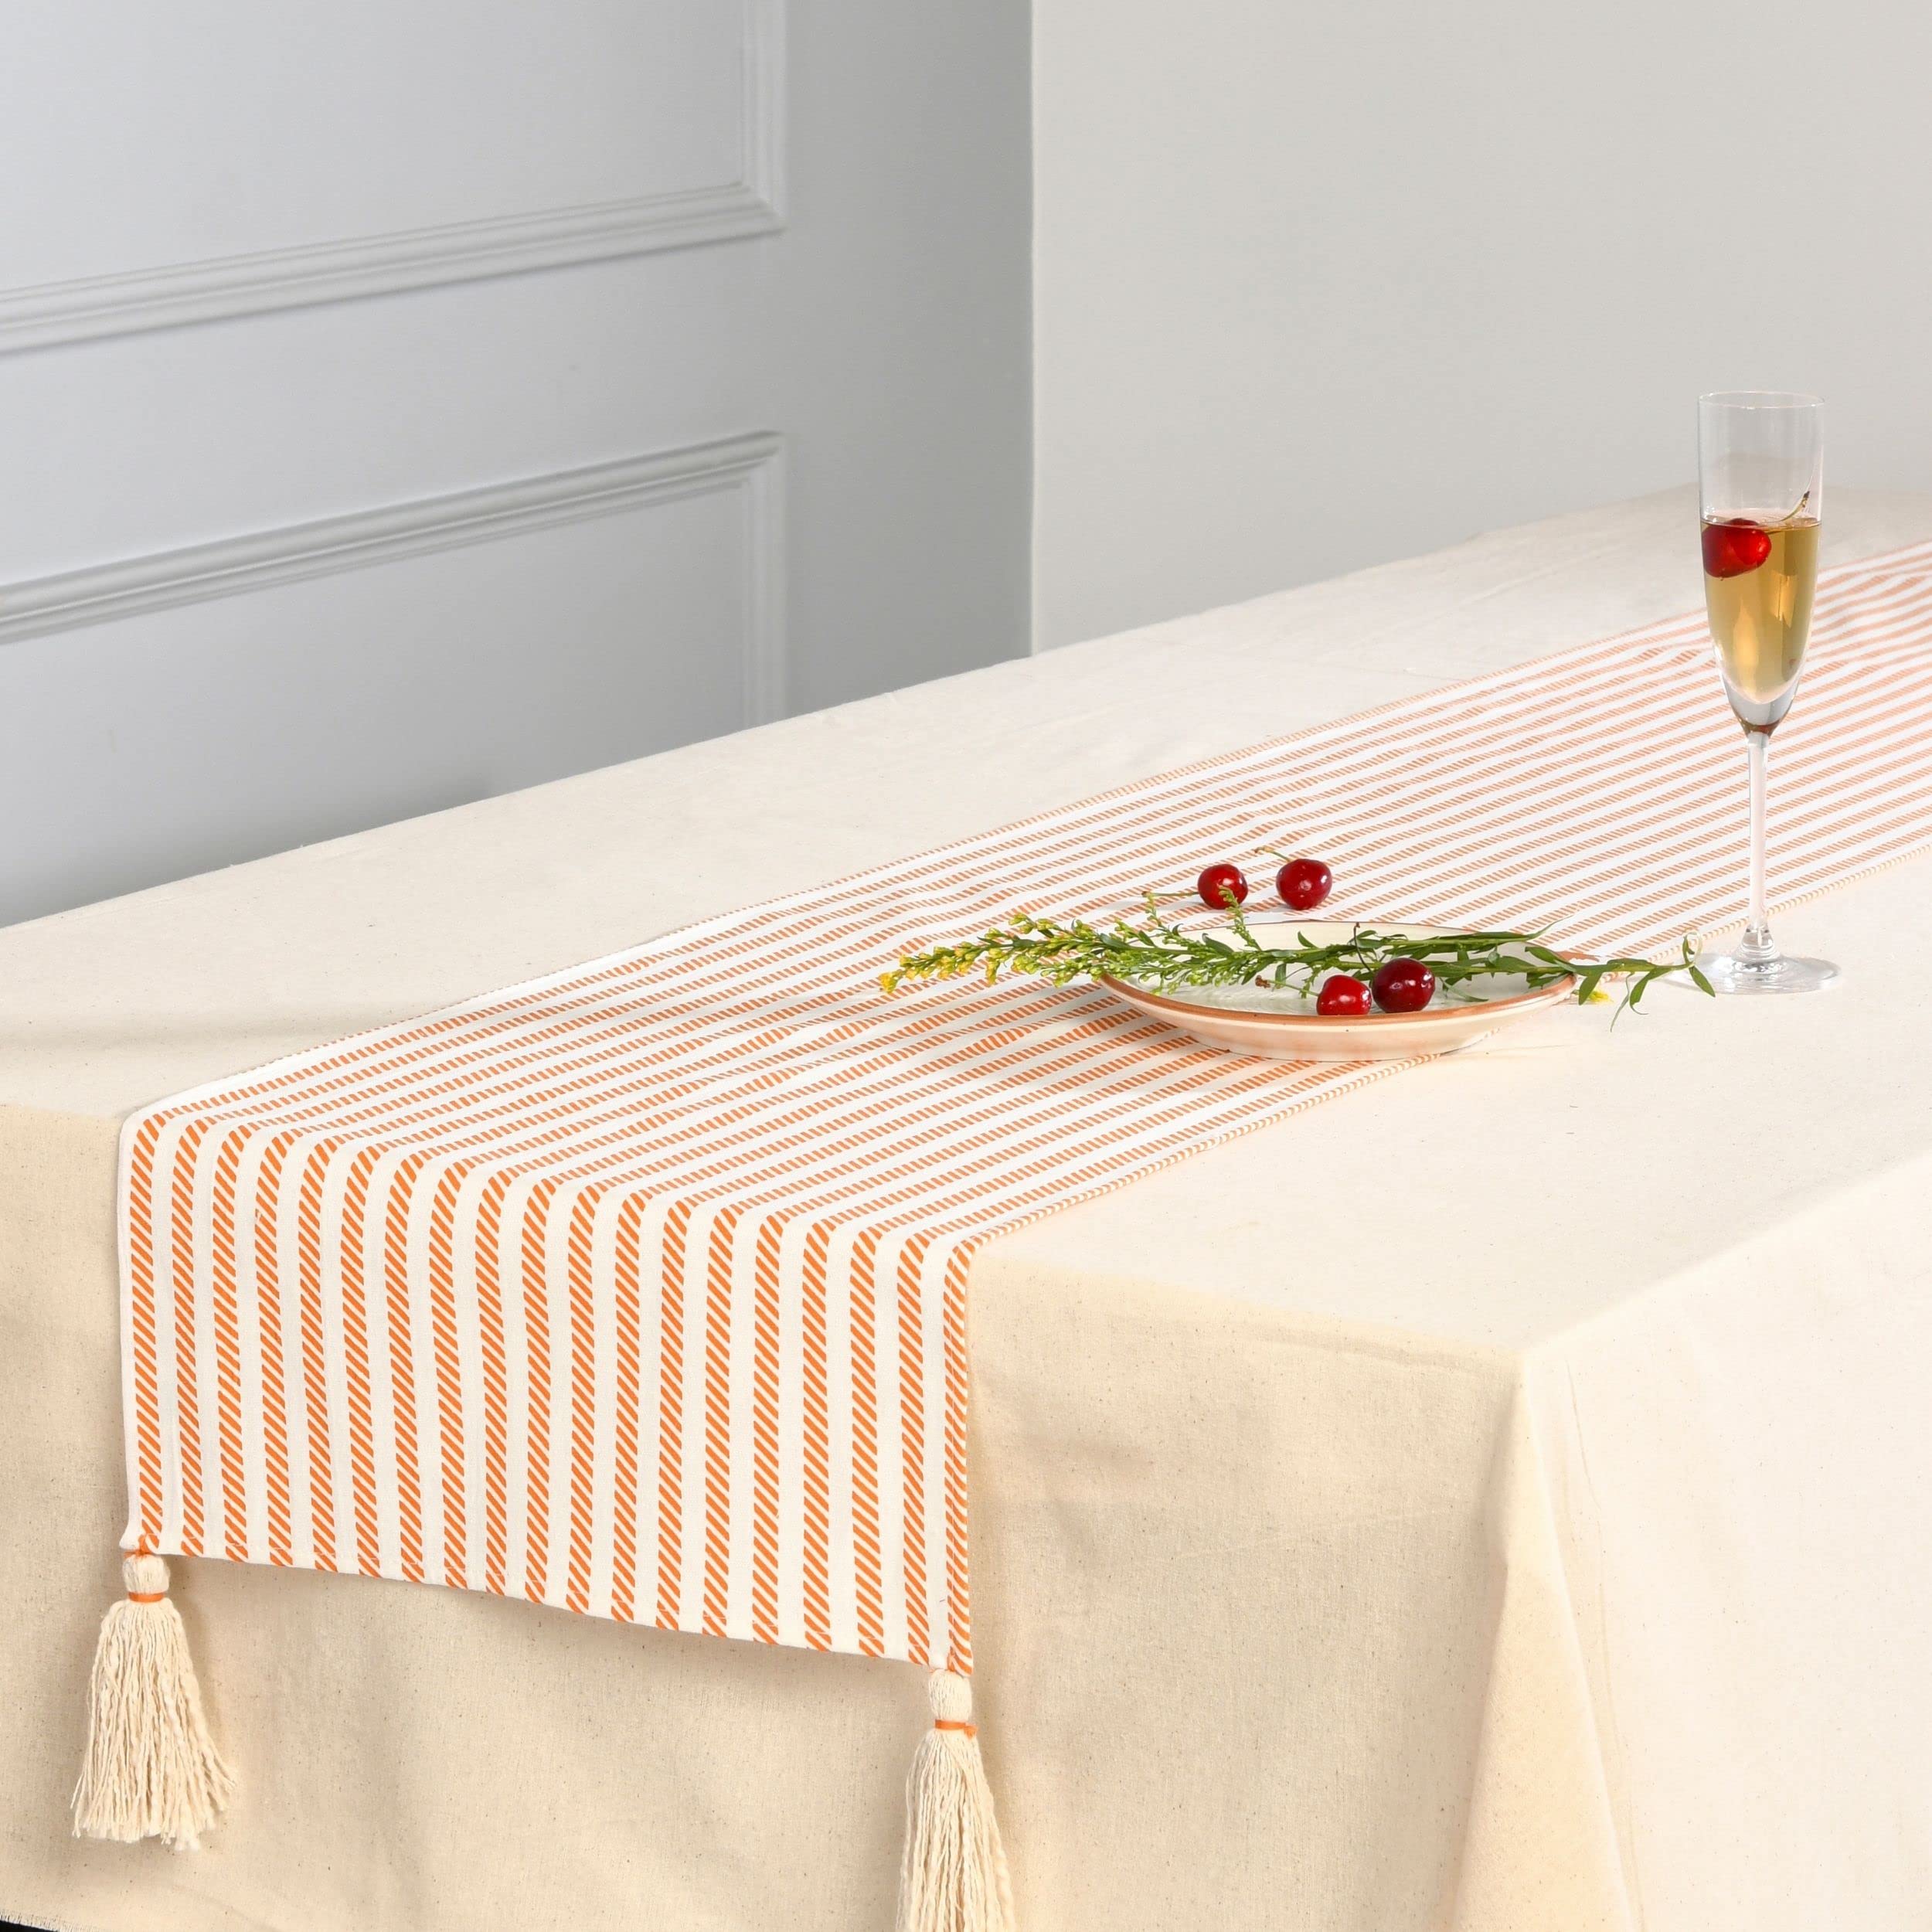 Folkulture Table Runner 72 Inches Long with Tassels for Dining Table Decor, 100% Cotton Farmhouse Style Table Runner, Boho Runner for Home Décor, Coffee Table Runner (Russet Orange)